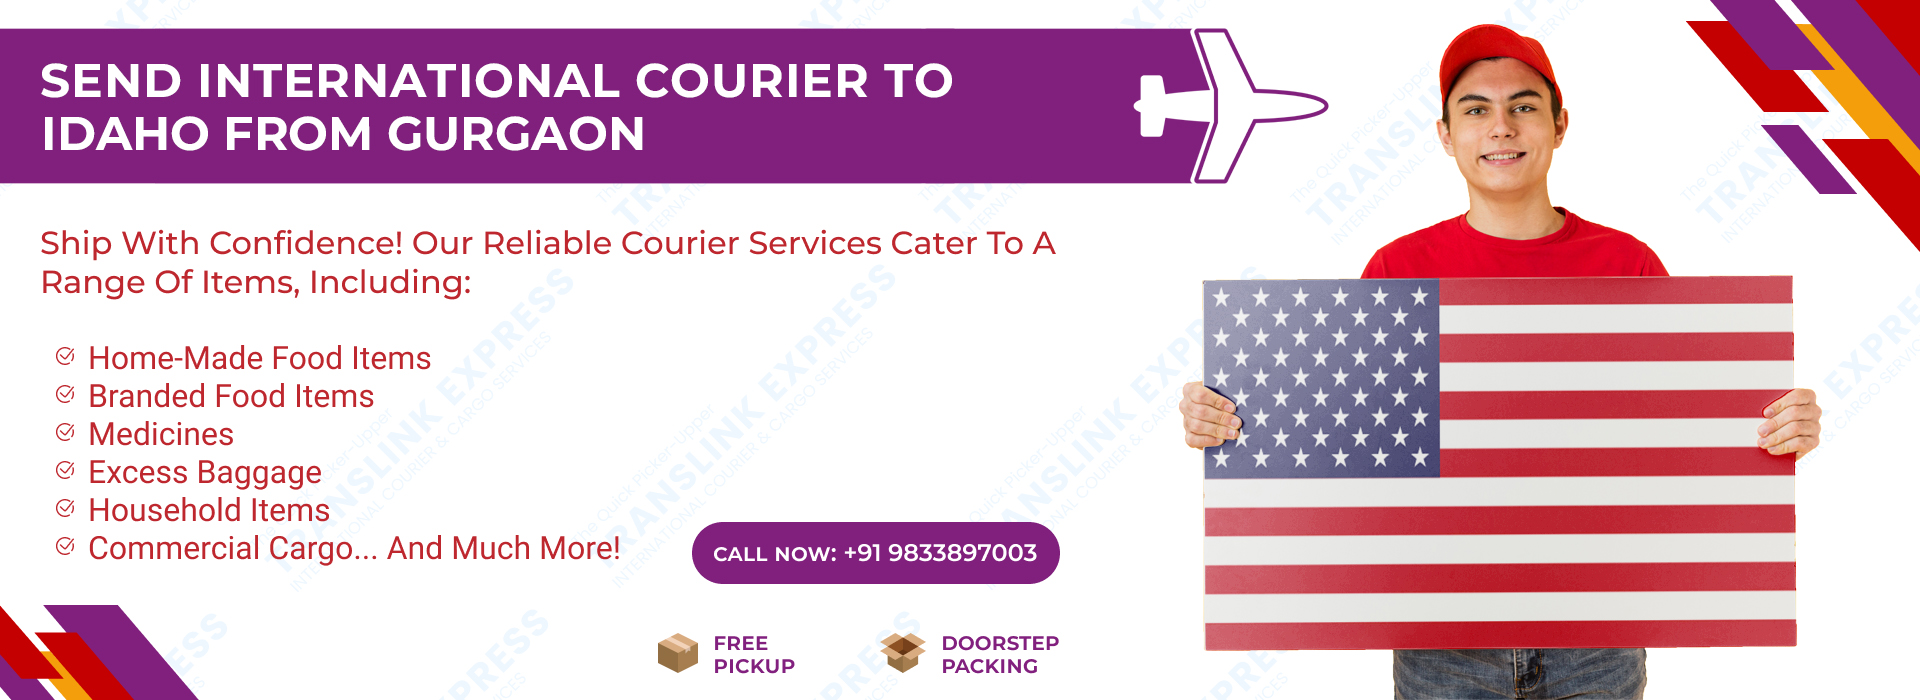 Courier to Idaho From Gurgaon